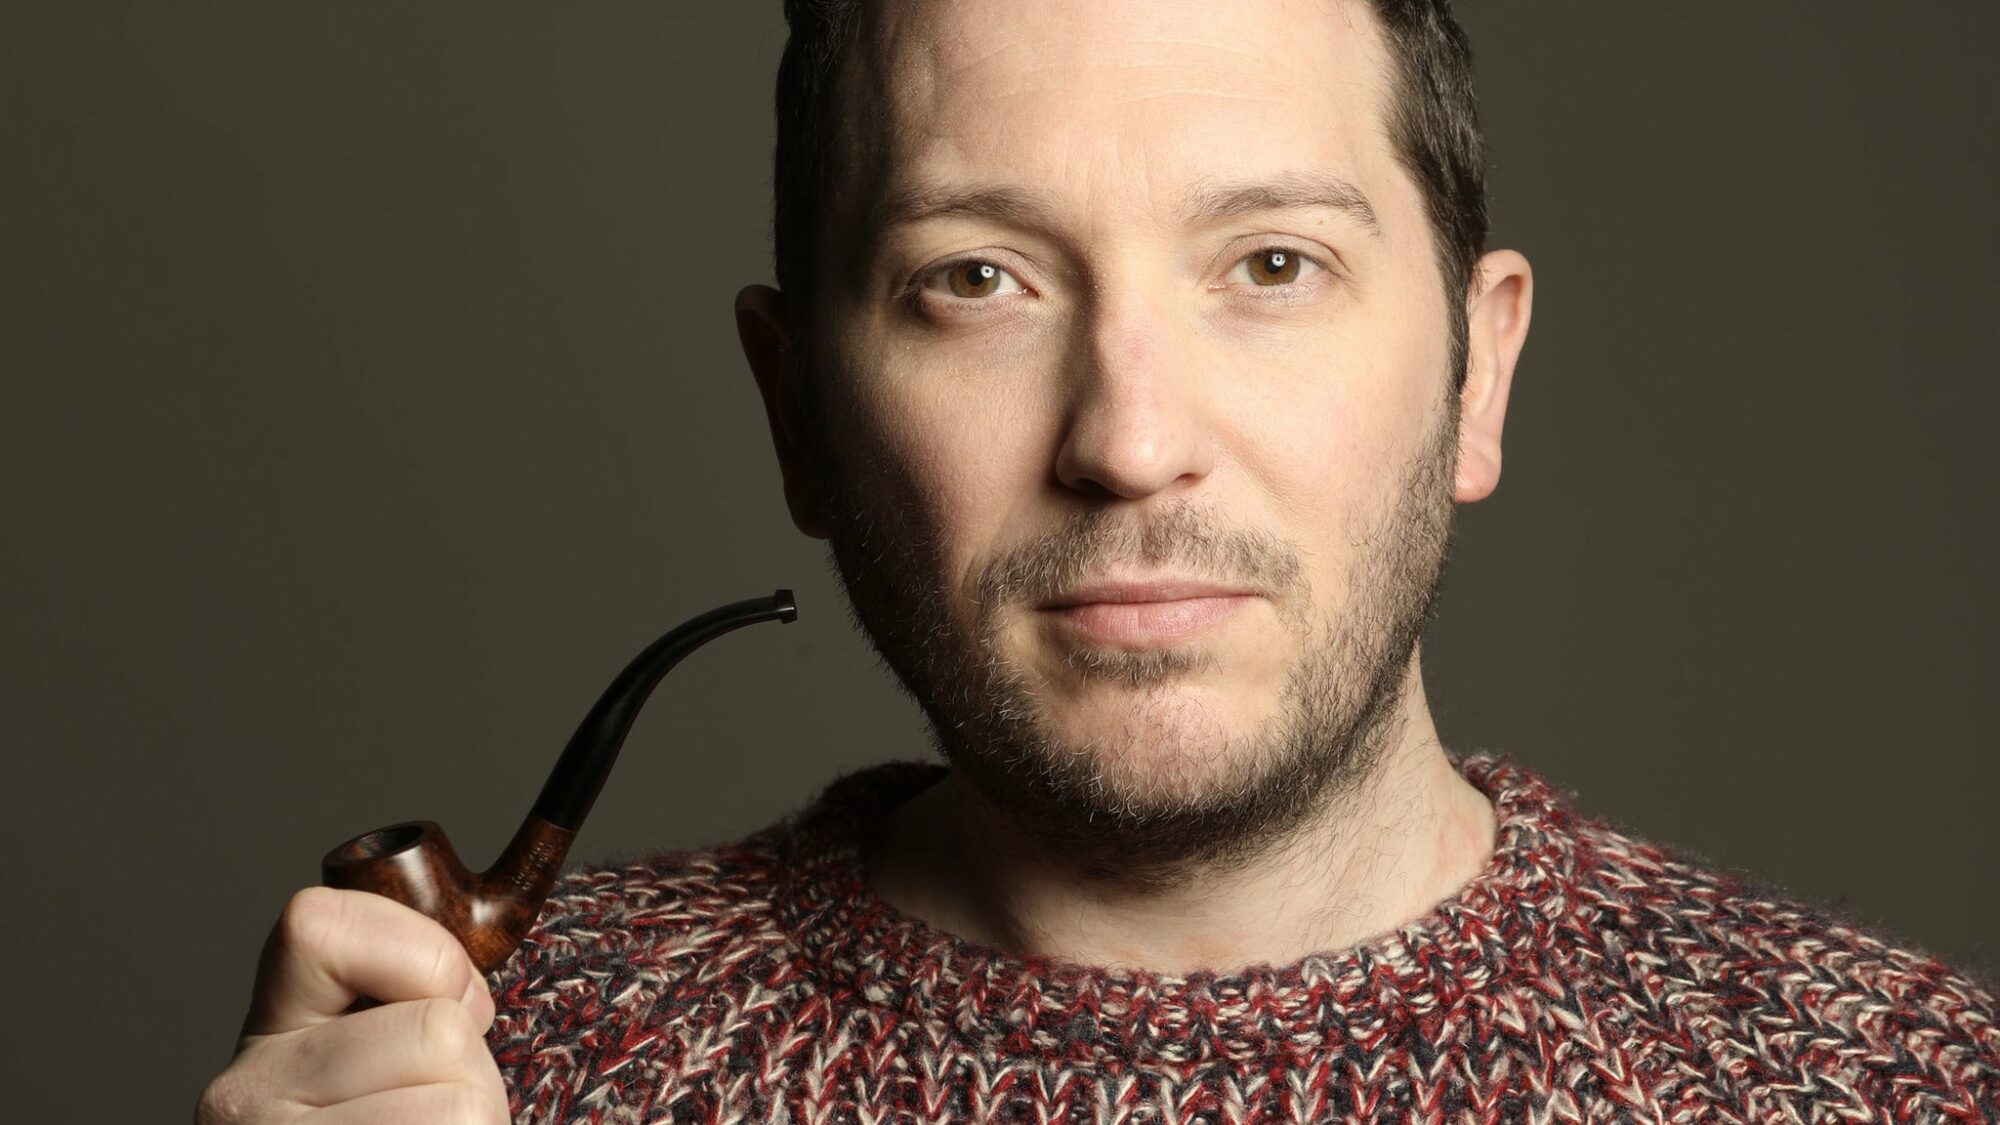 Image name Jon Richardson The Knitwit at Leeds Grand Theatre Leeds the 20 image from the post What’s on next week? From Monday 25th September in Yorkshire.com.